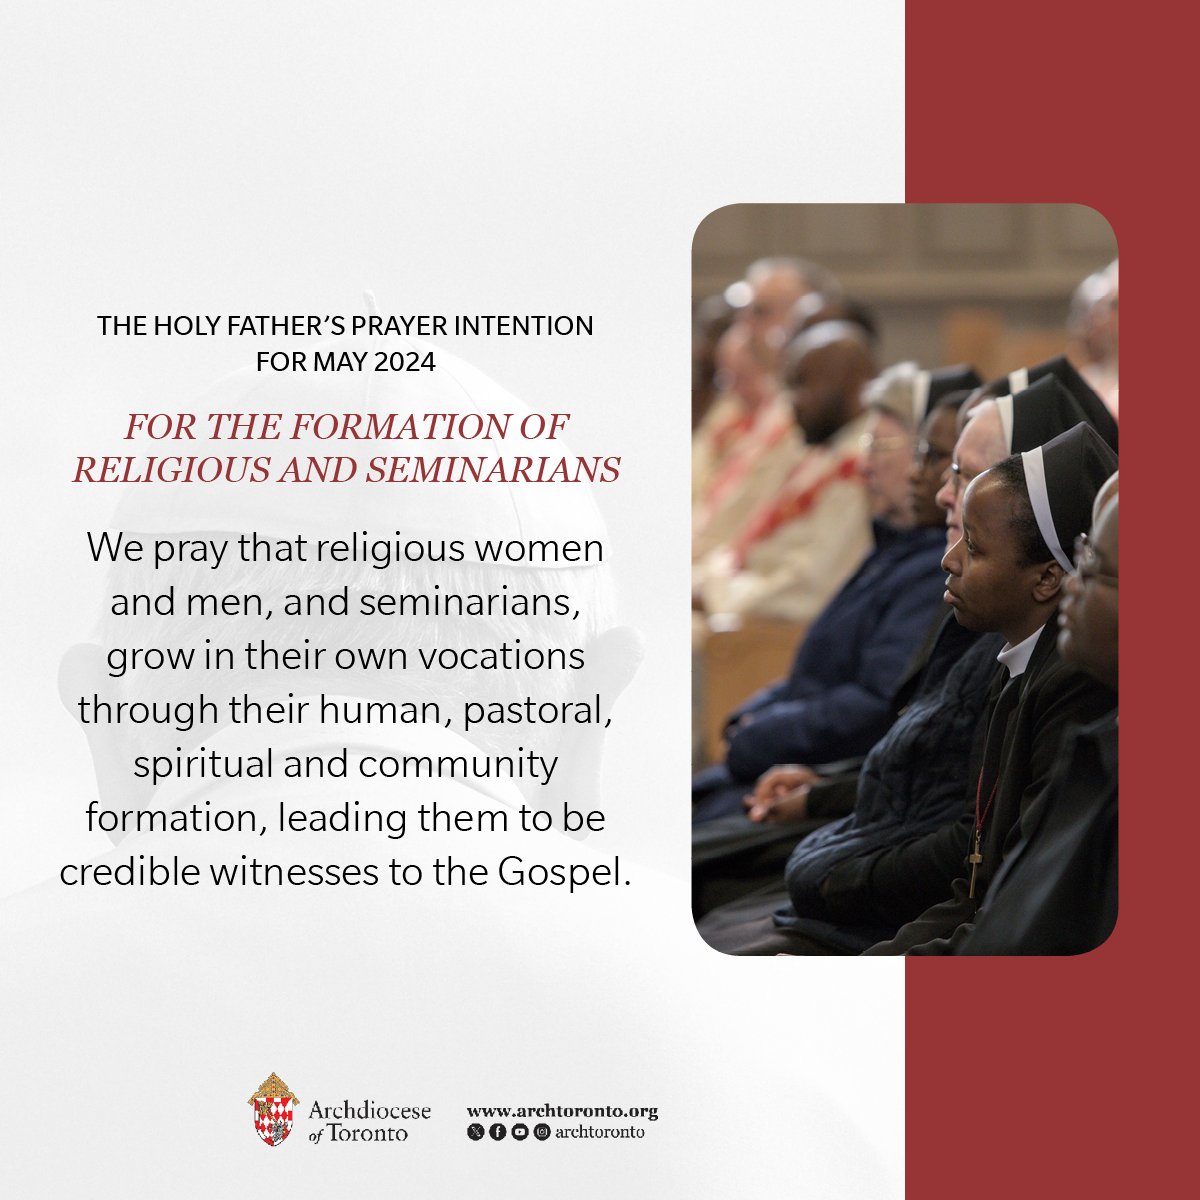 This month, we join Pope Francis in praying that religious women and men, and seminarians, grow in their own vocations through their human, pastoral, spiritual and community formation, leading them to be credible witnesses to the Gospel. #PrayTogether